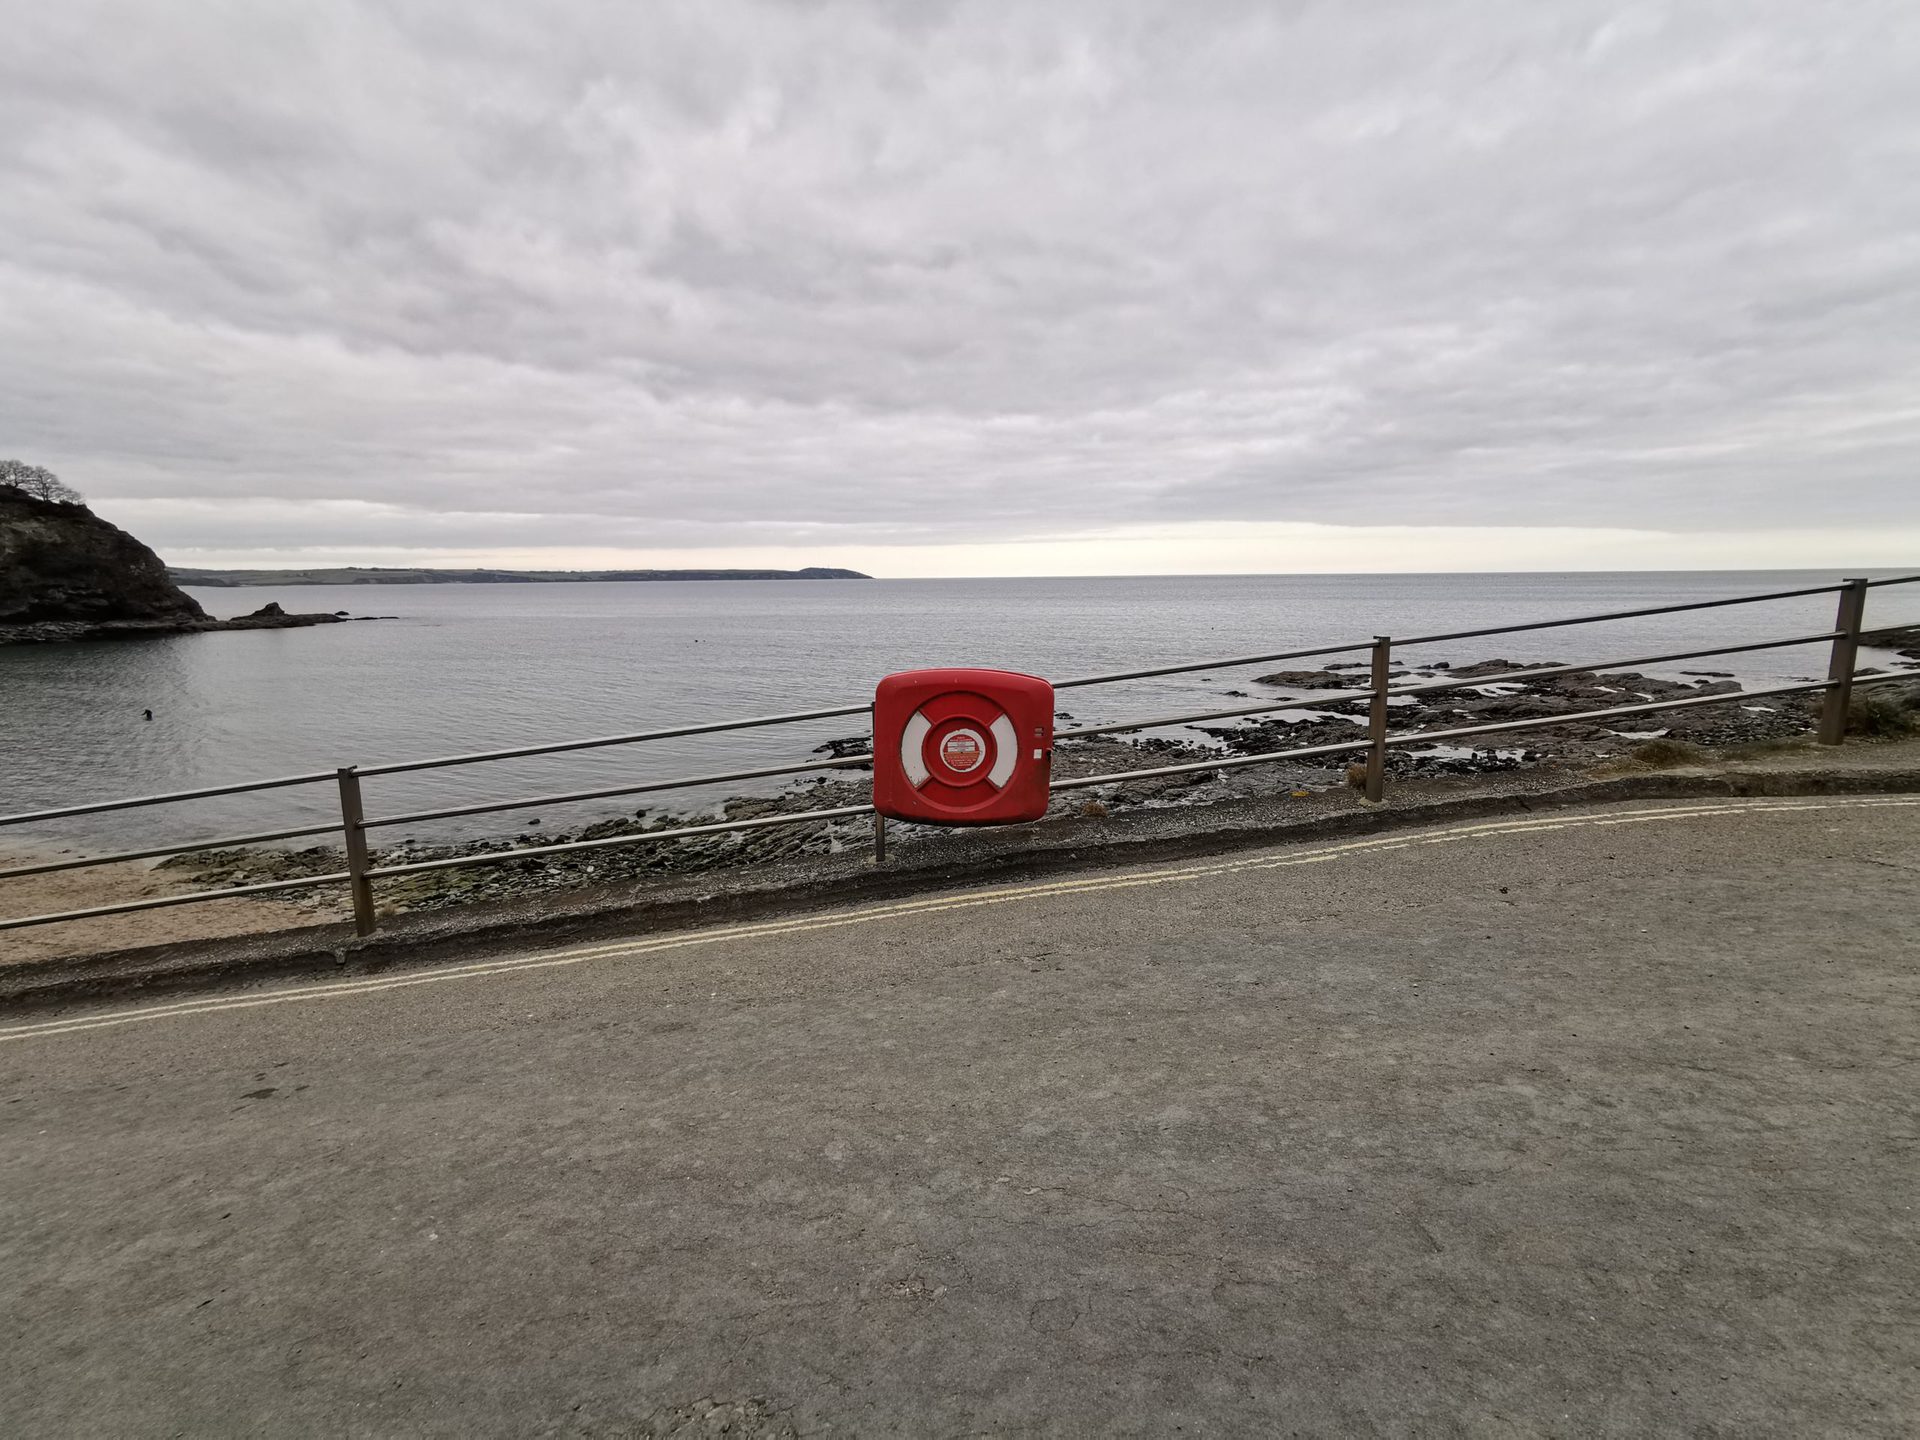 HUAWEI P30 Pro ultrawide photo sample of a red sign